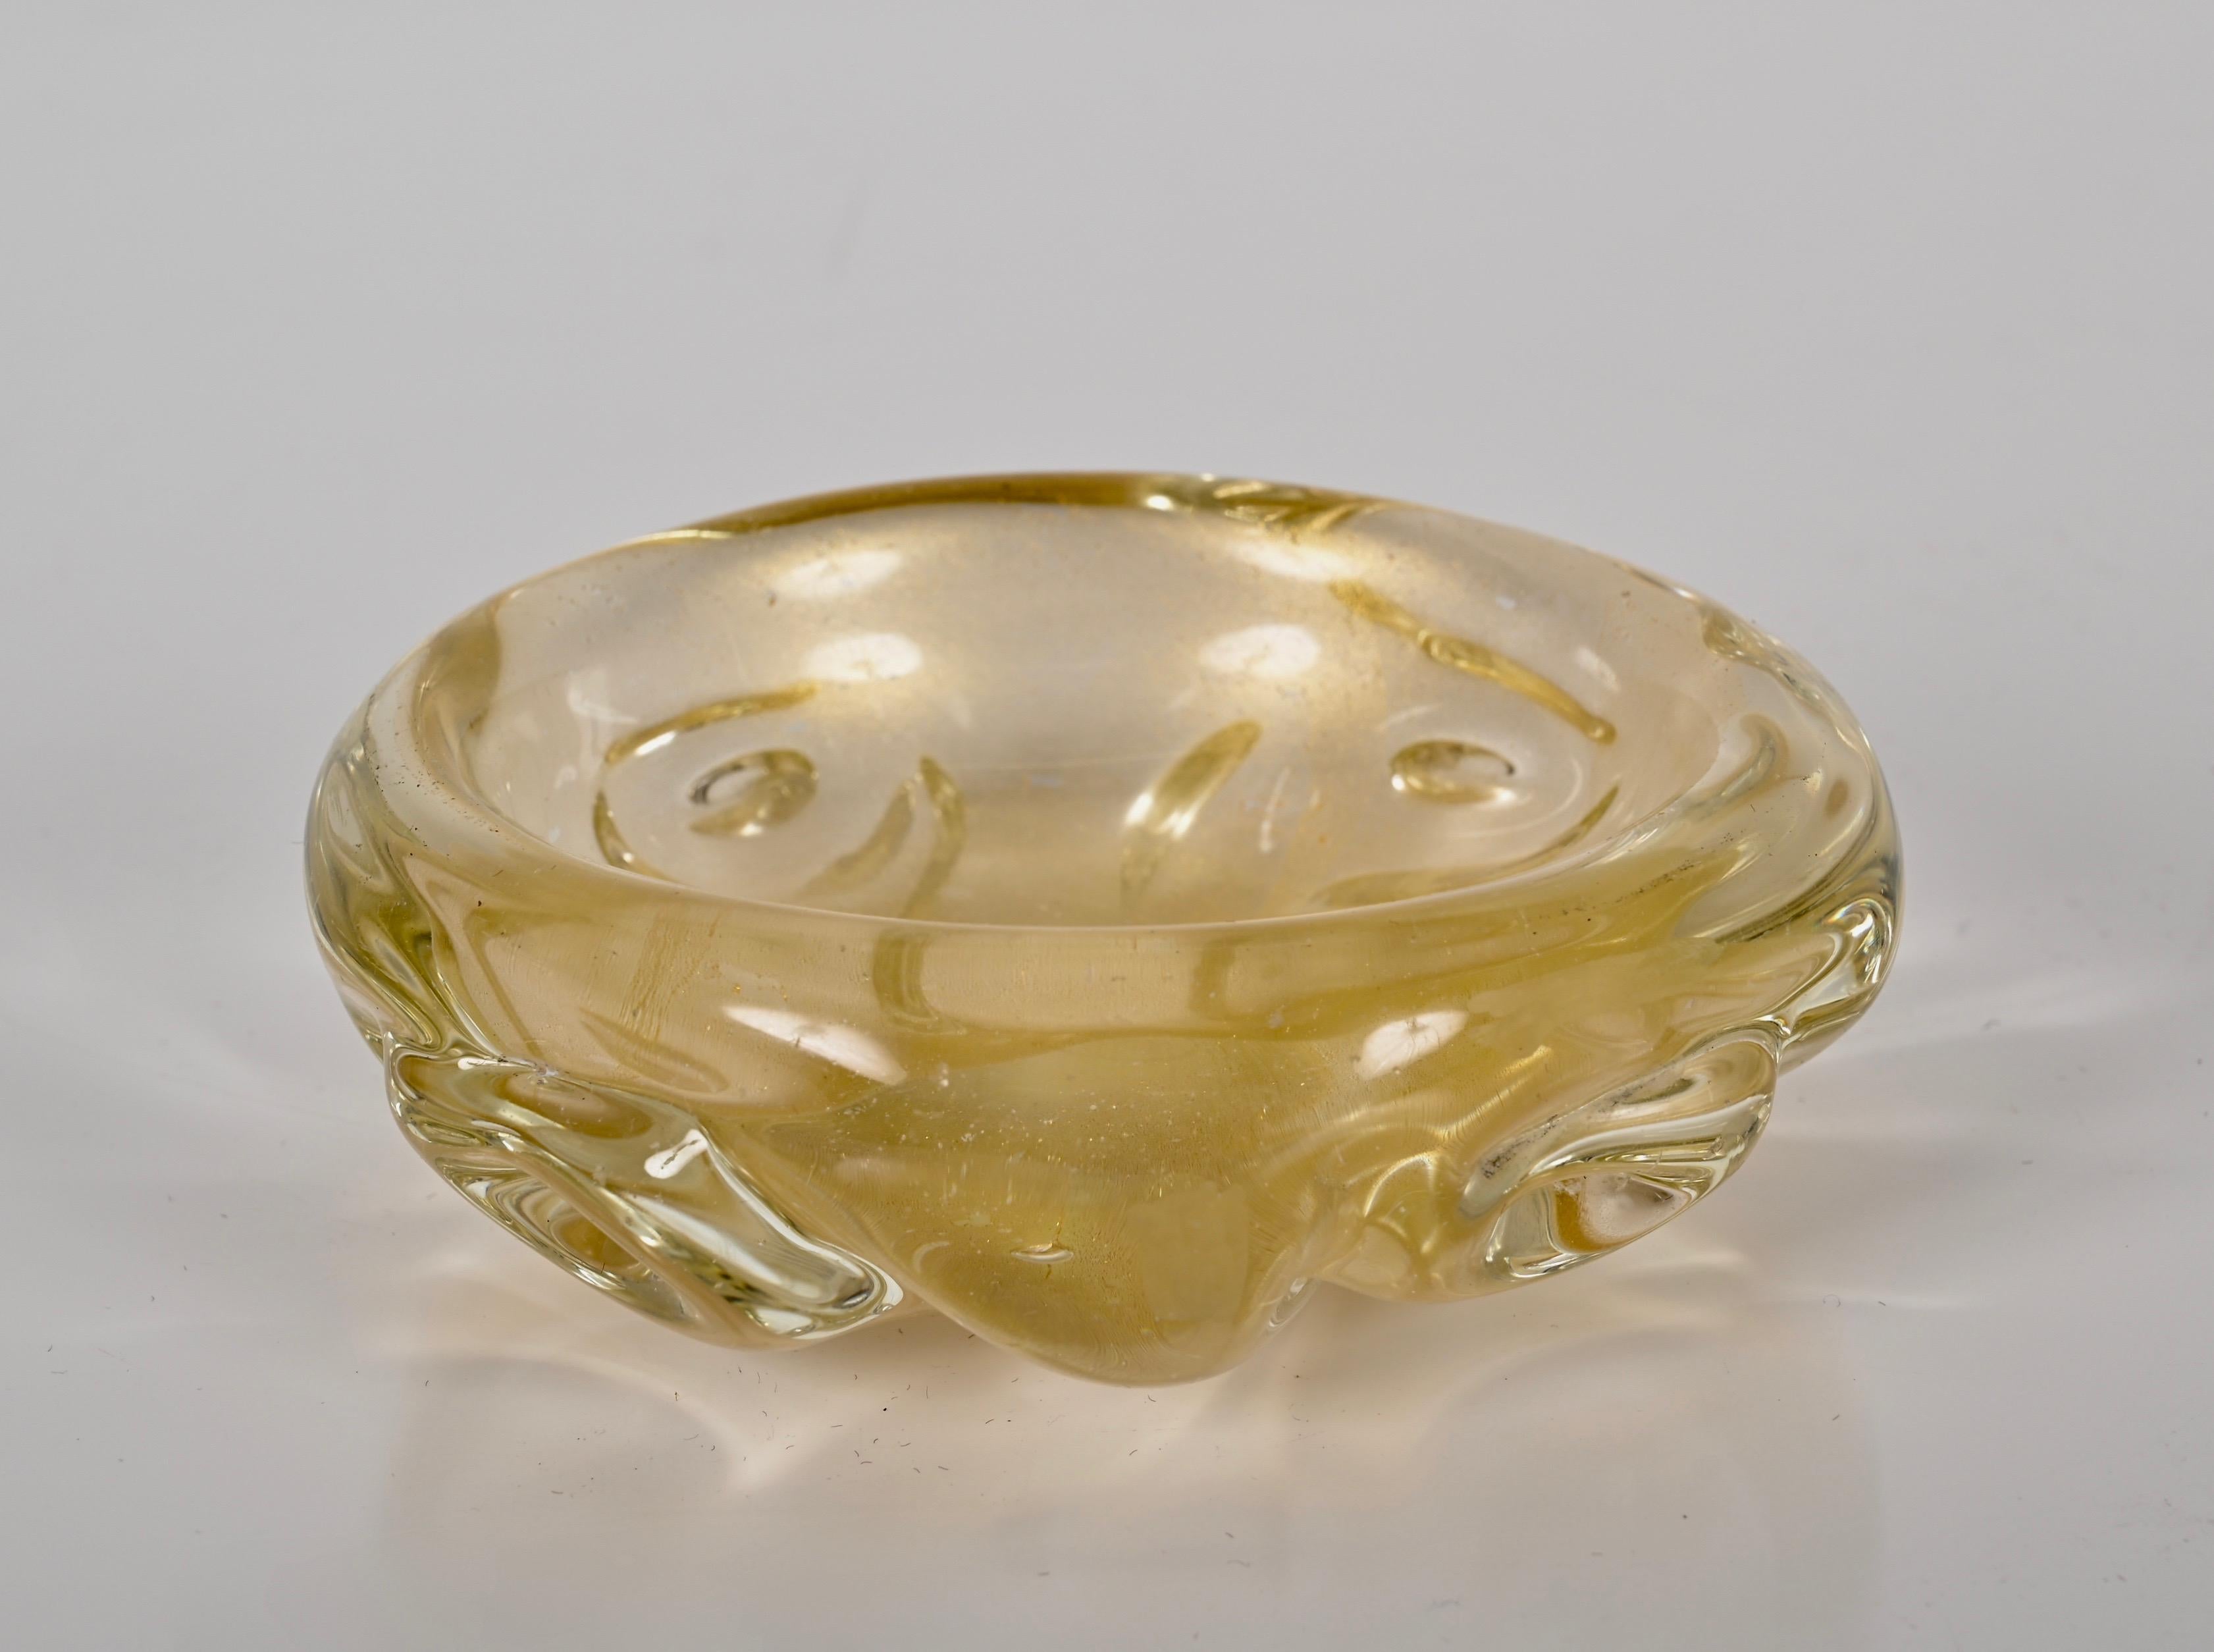 Archimede Seguso Midcentury Murano Glass Bowl with Gold Dots, Italy, 1960s For Sale 1